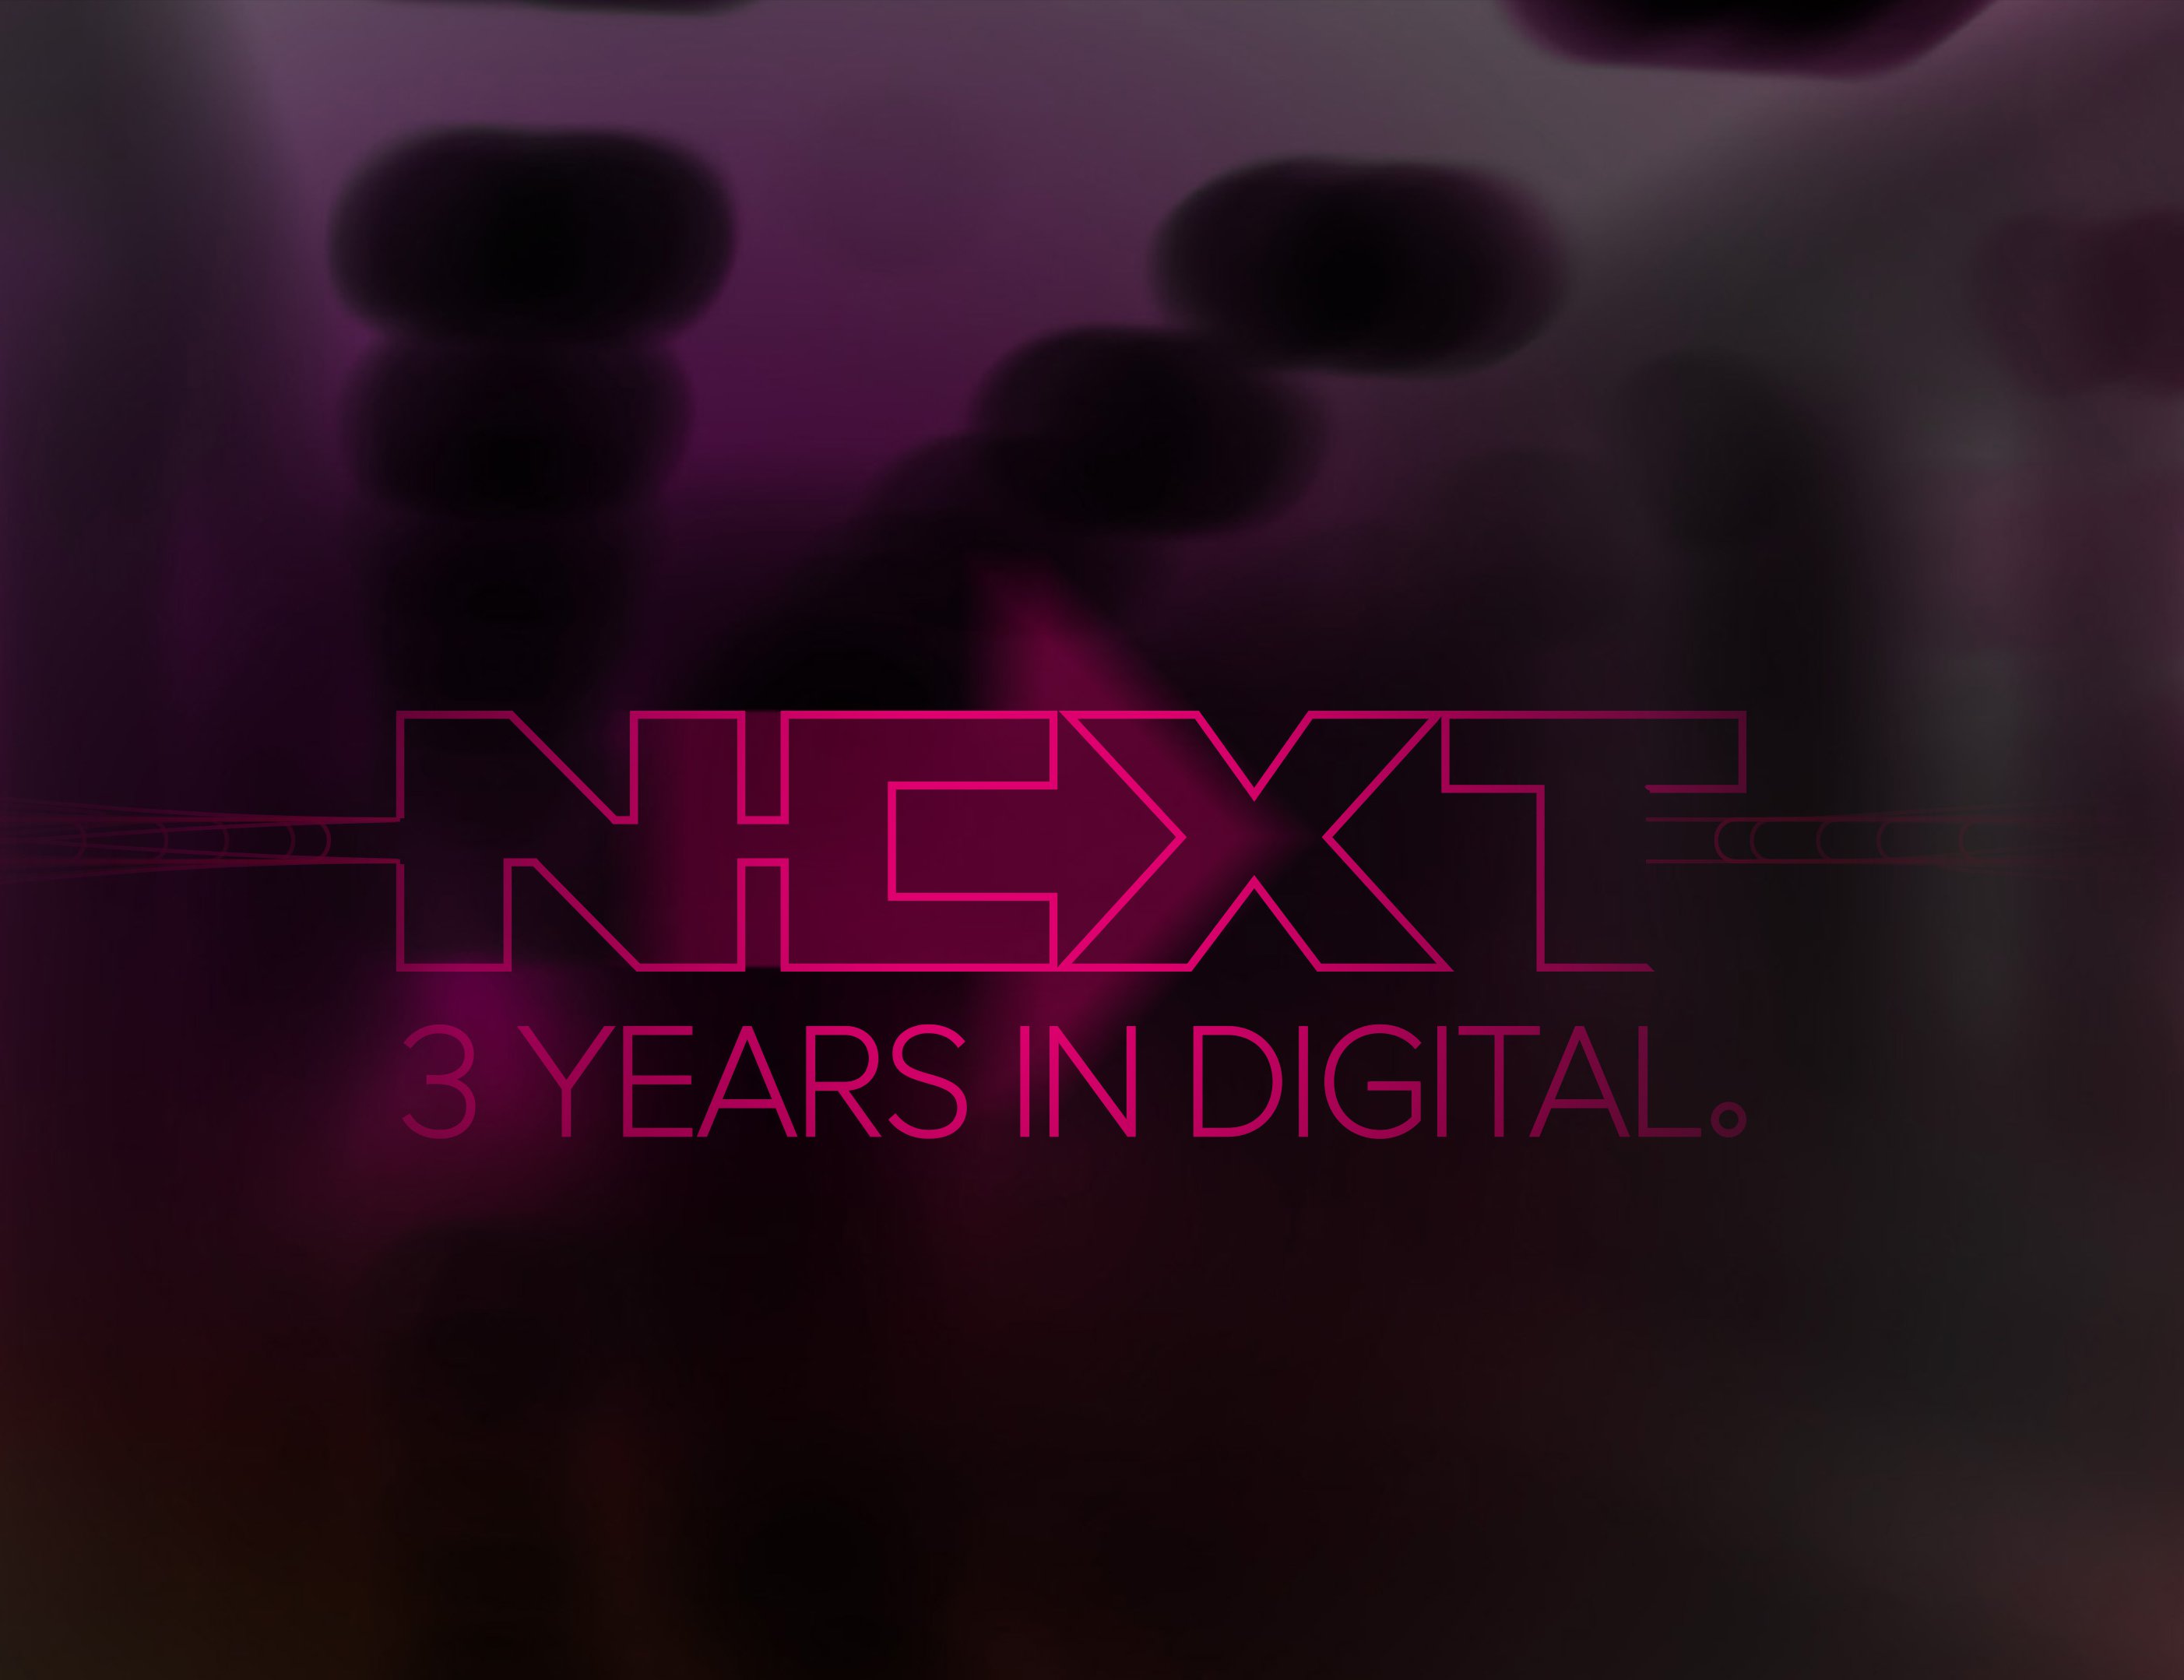 Next 3 Years in Digital Event